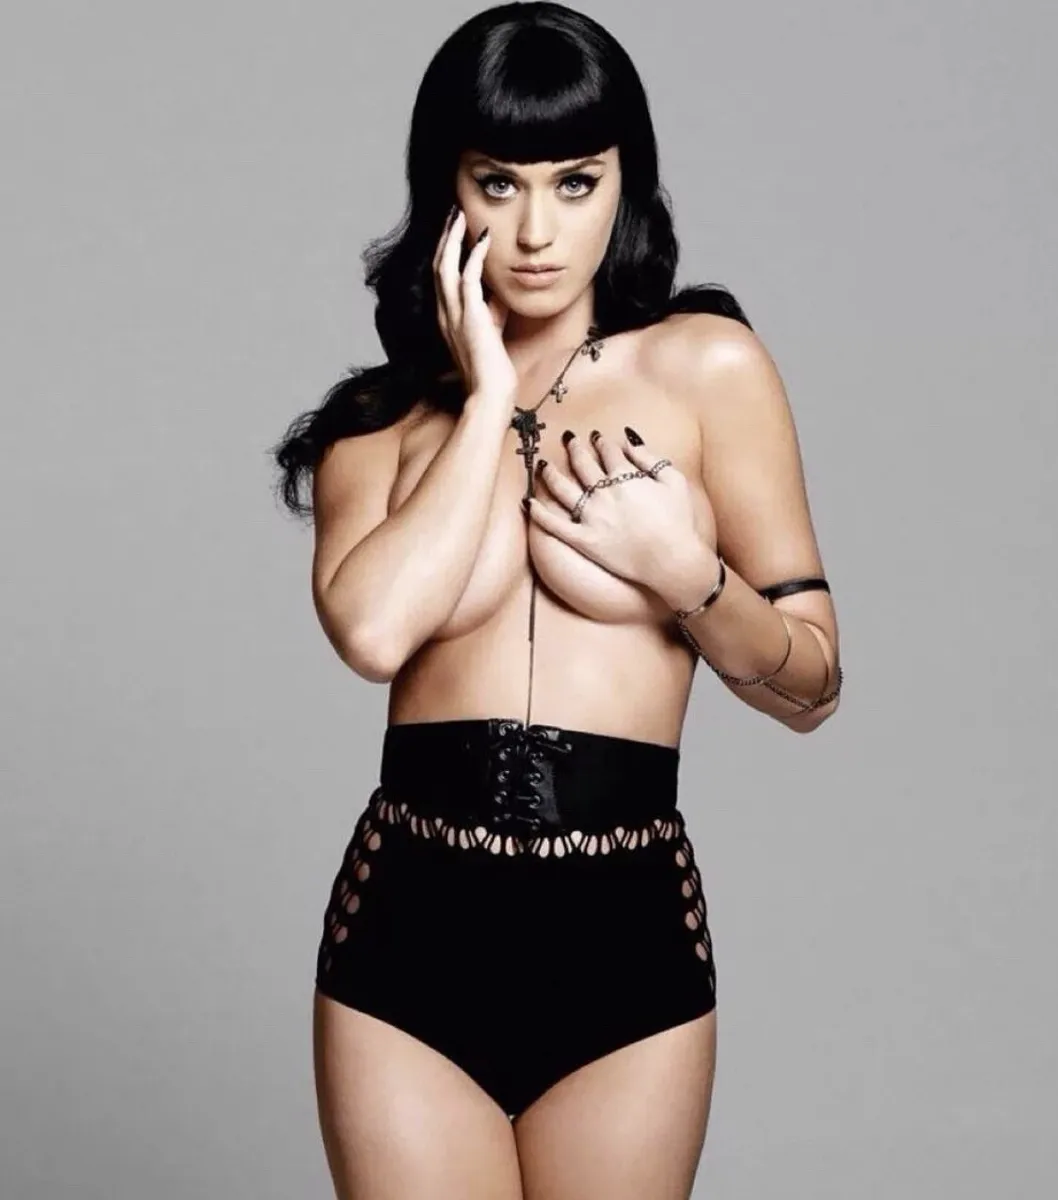 Best of Topless photos of katy perry